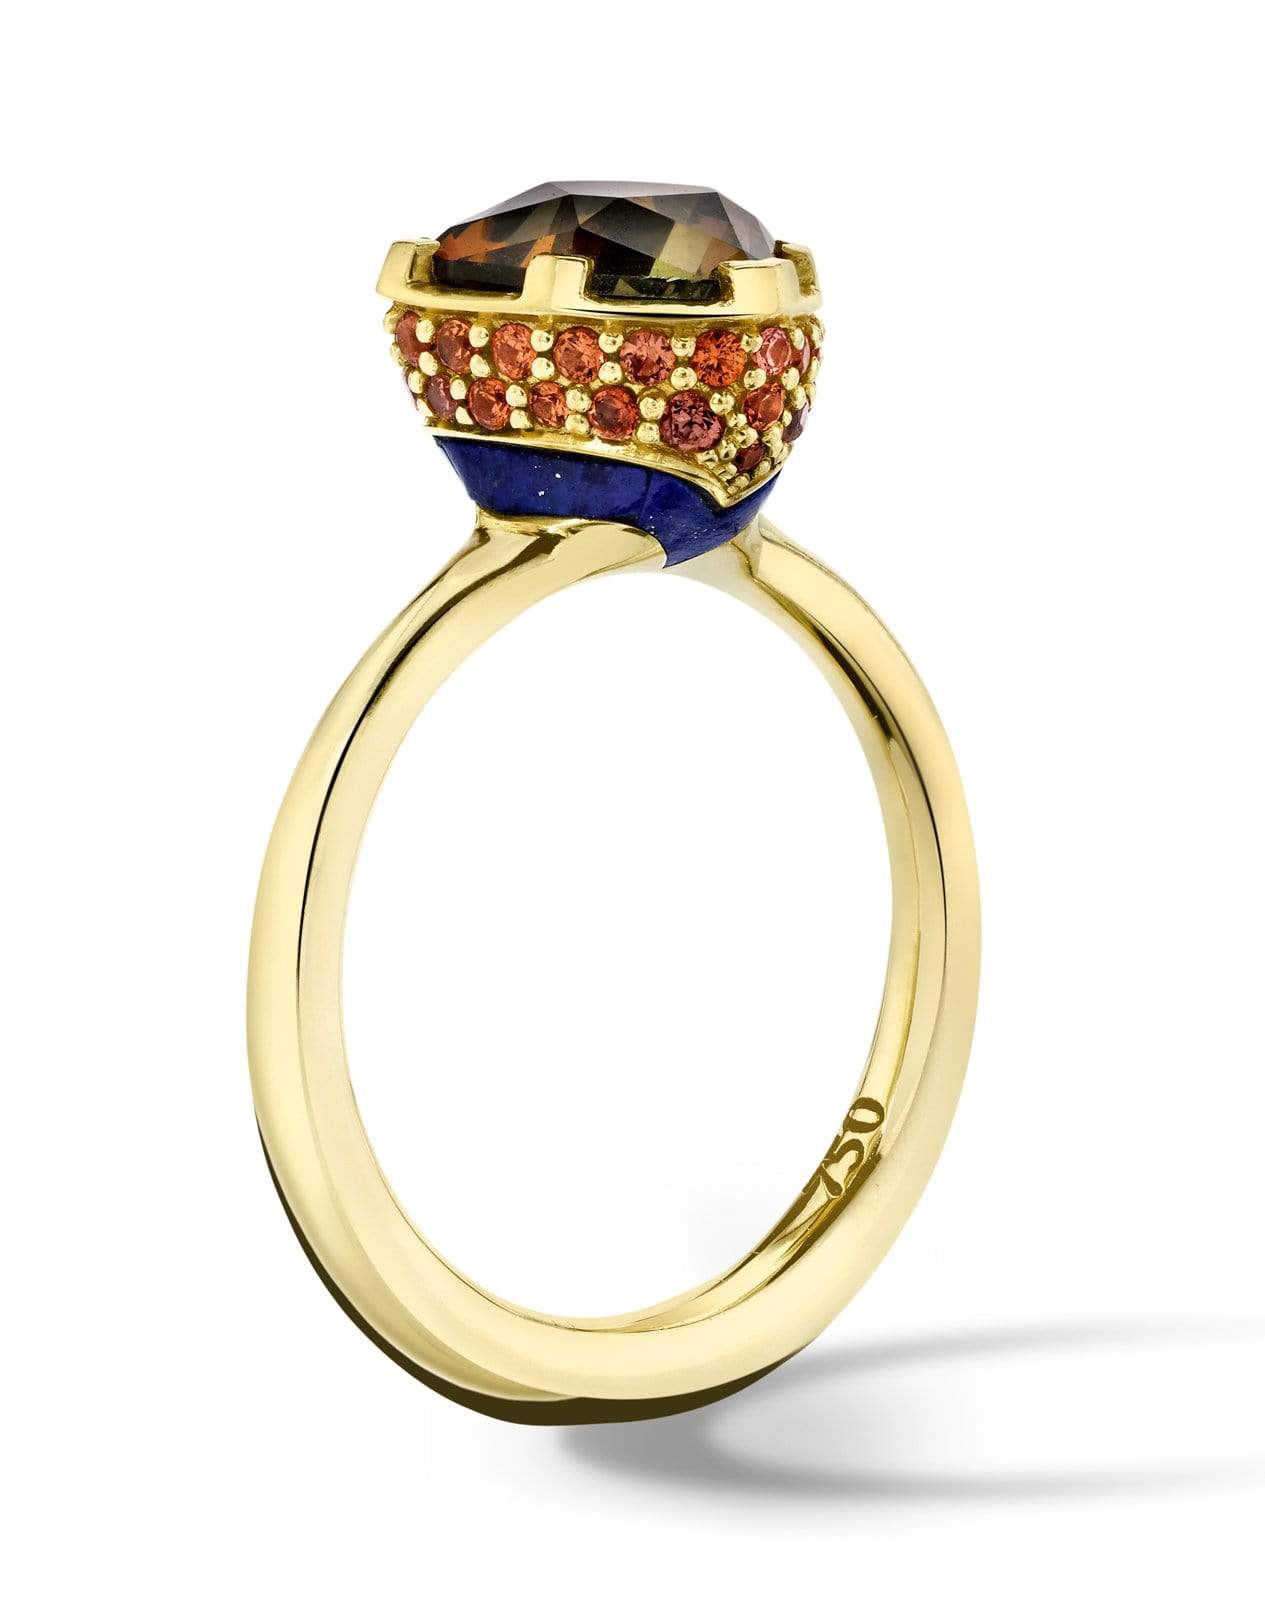 ANDY LIF-Andalusite and Lapis Ring-YELLOW GOLD